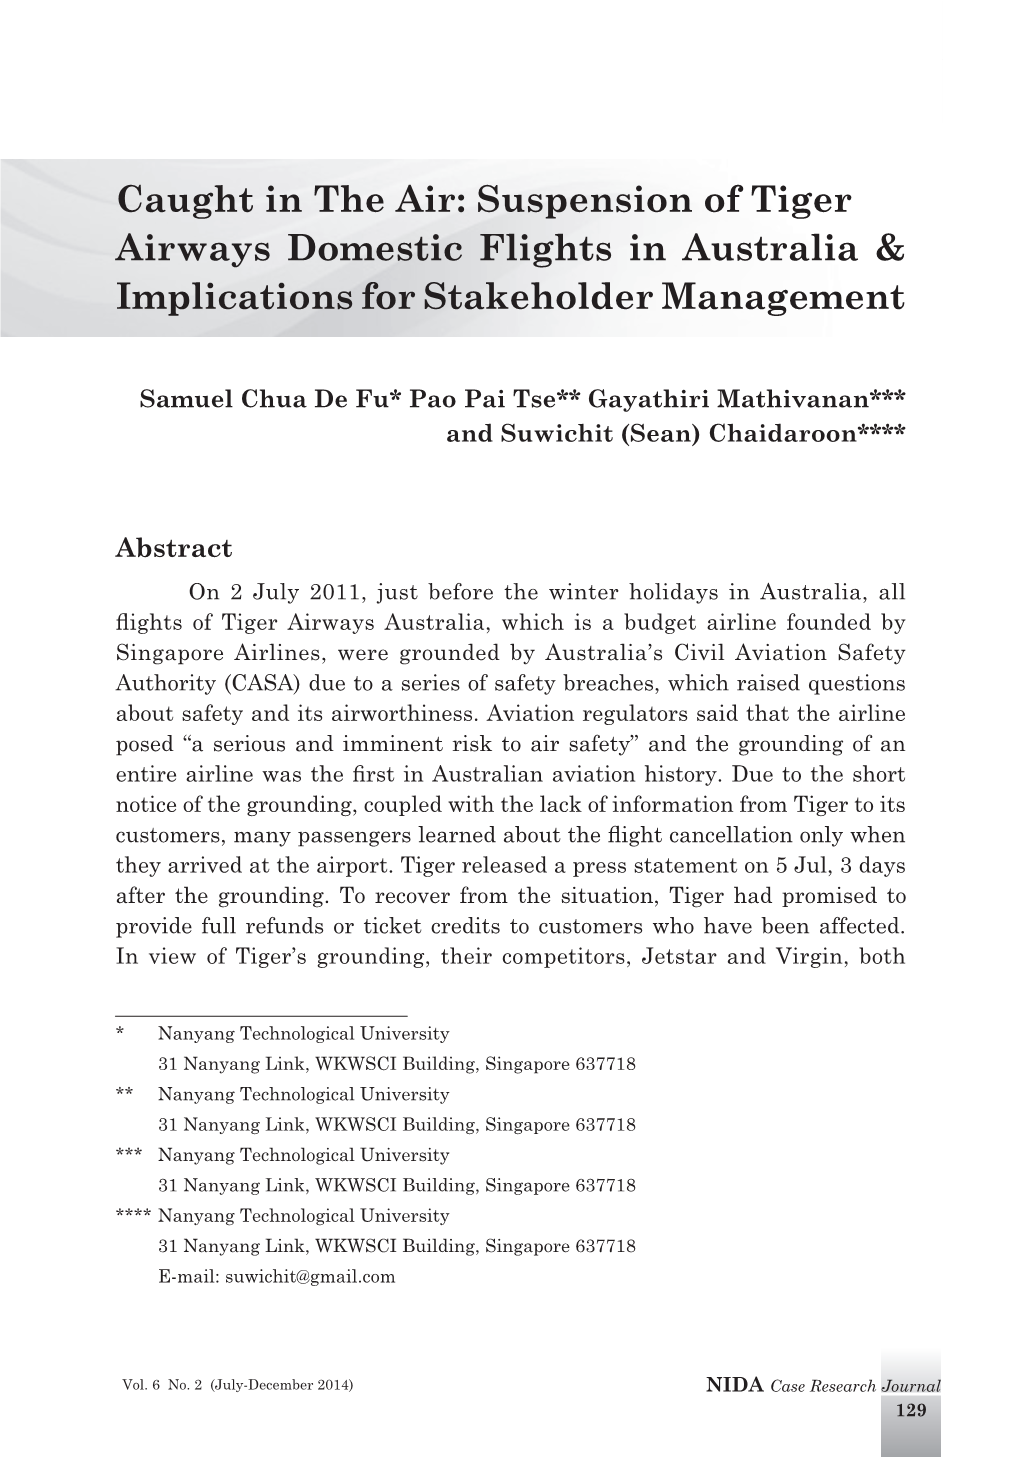 Caught in the Air: Suspension of Tiger Airways Domestic Flights in Australia & Implications for Stakeholder Management